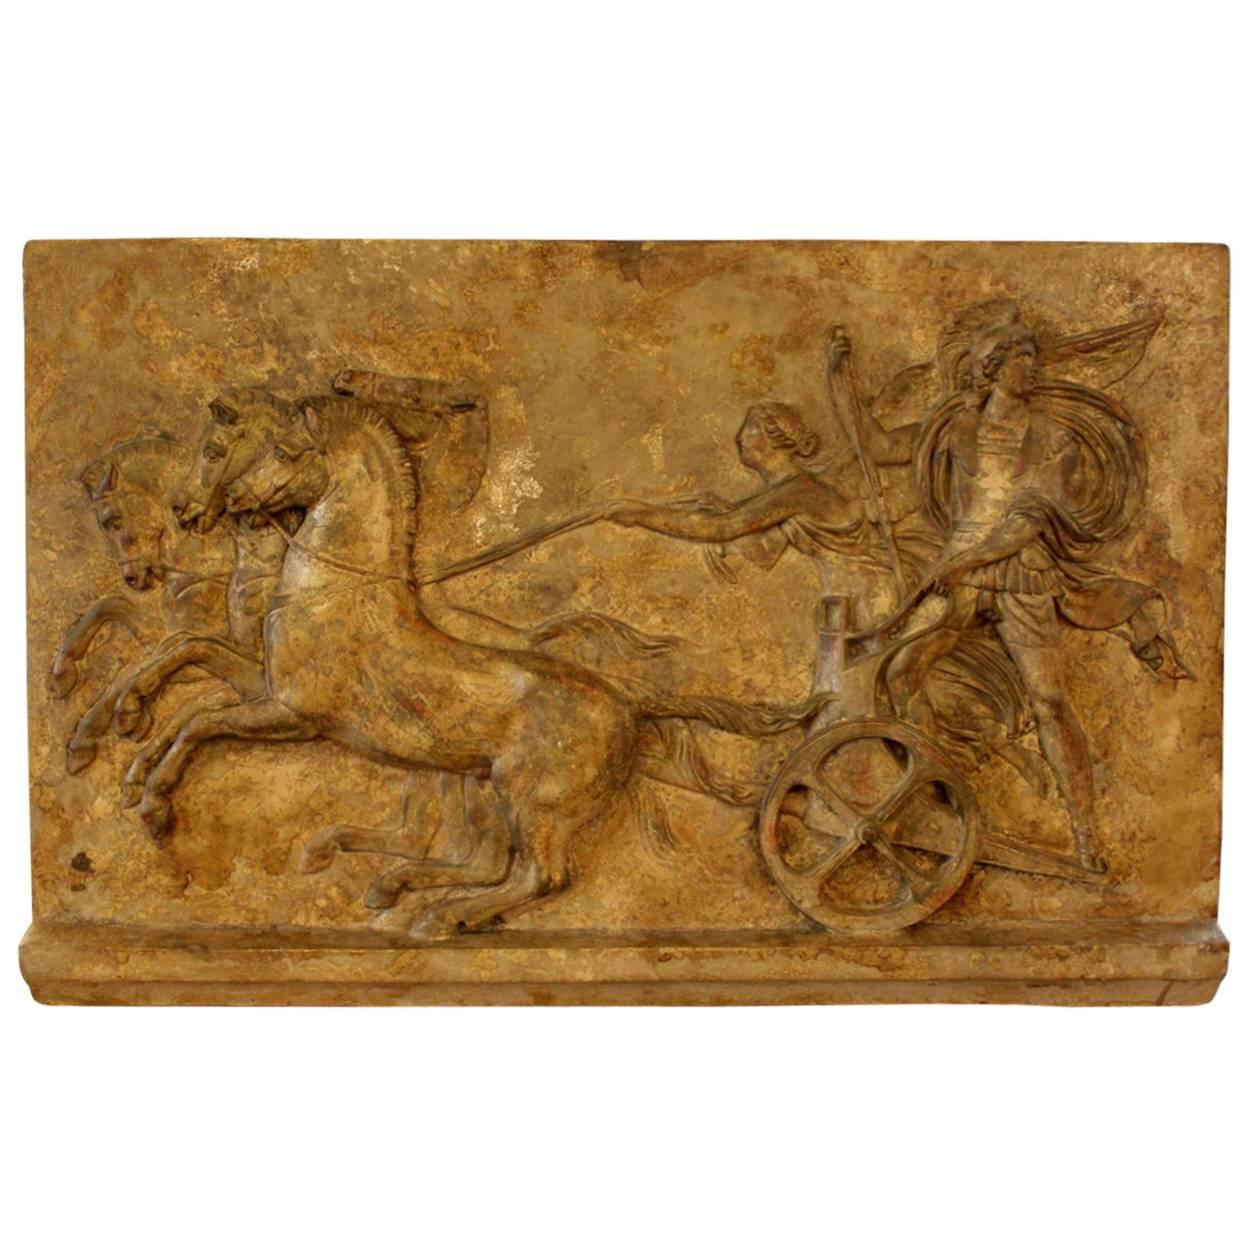 Academic Plaster Roman Frieze of Chariot Race with King Oinamoas